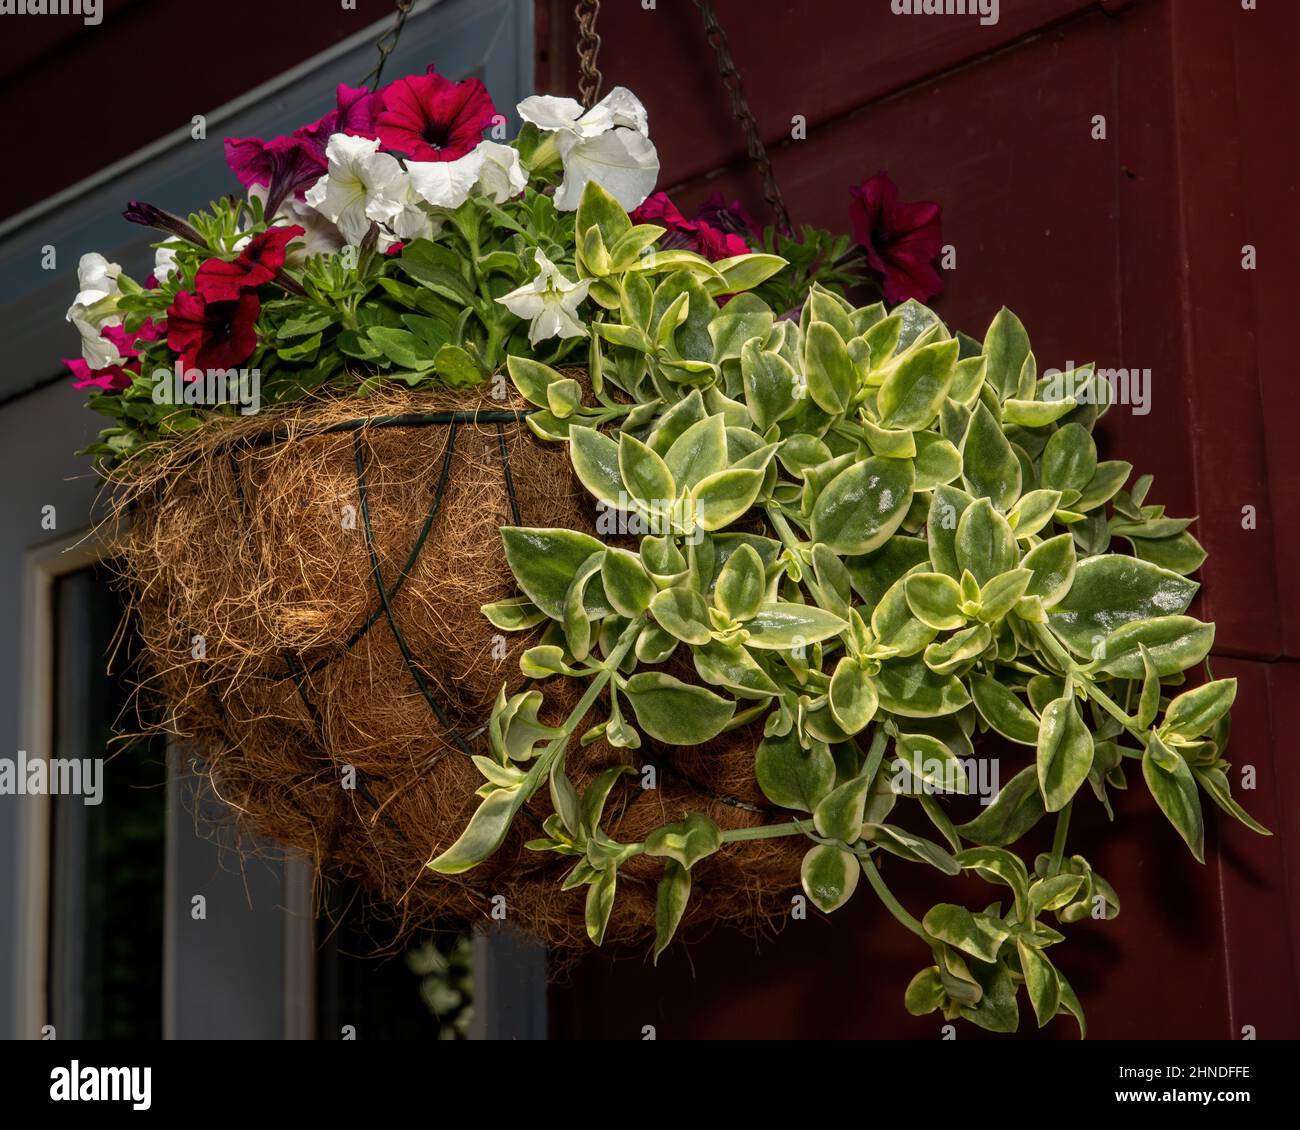 Pretty hanging basket of deep red and white petunias with trailing greenery in a summer garden. Stock Photo